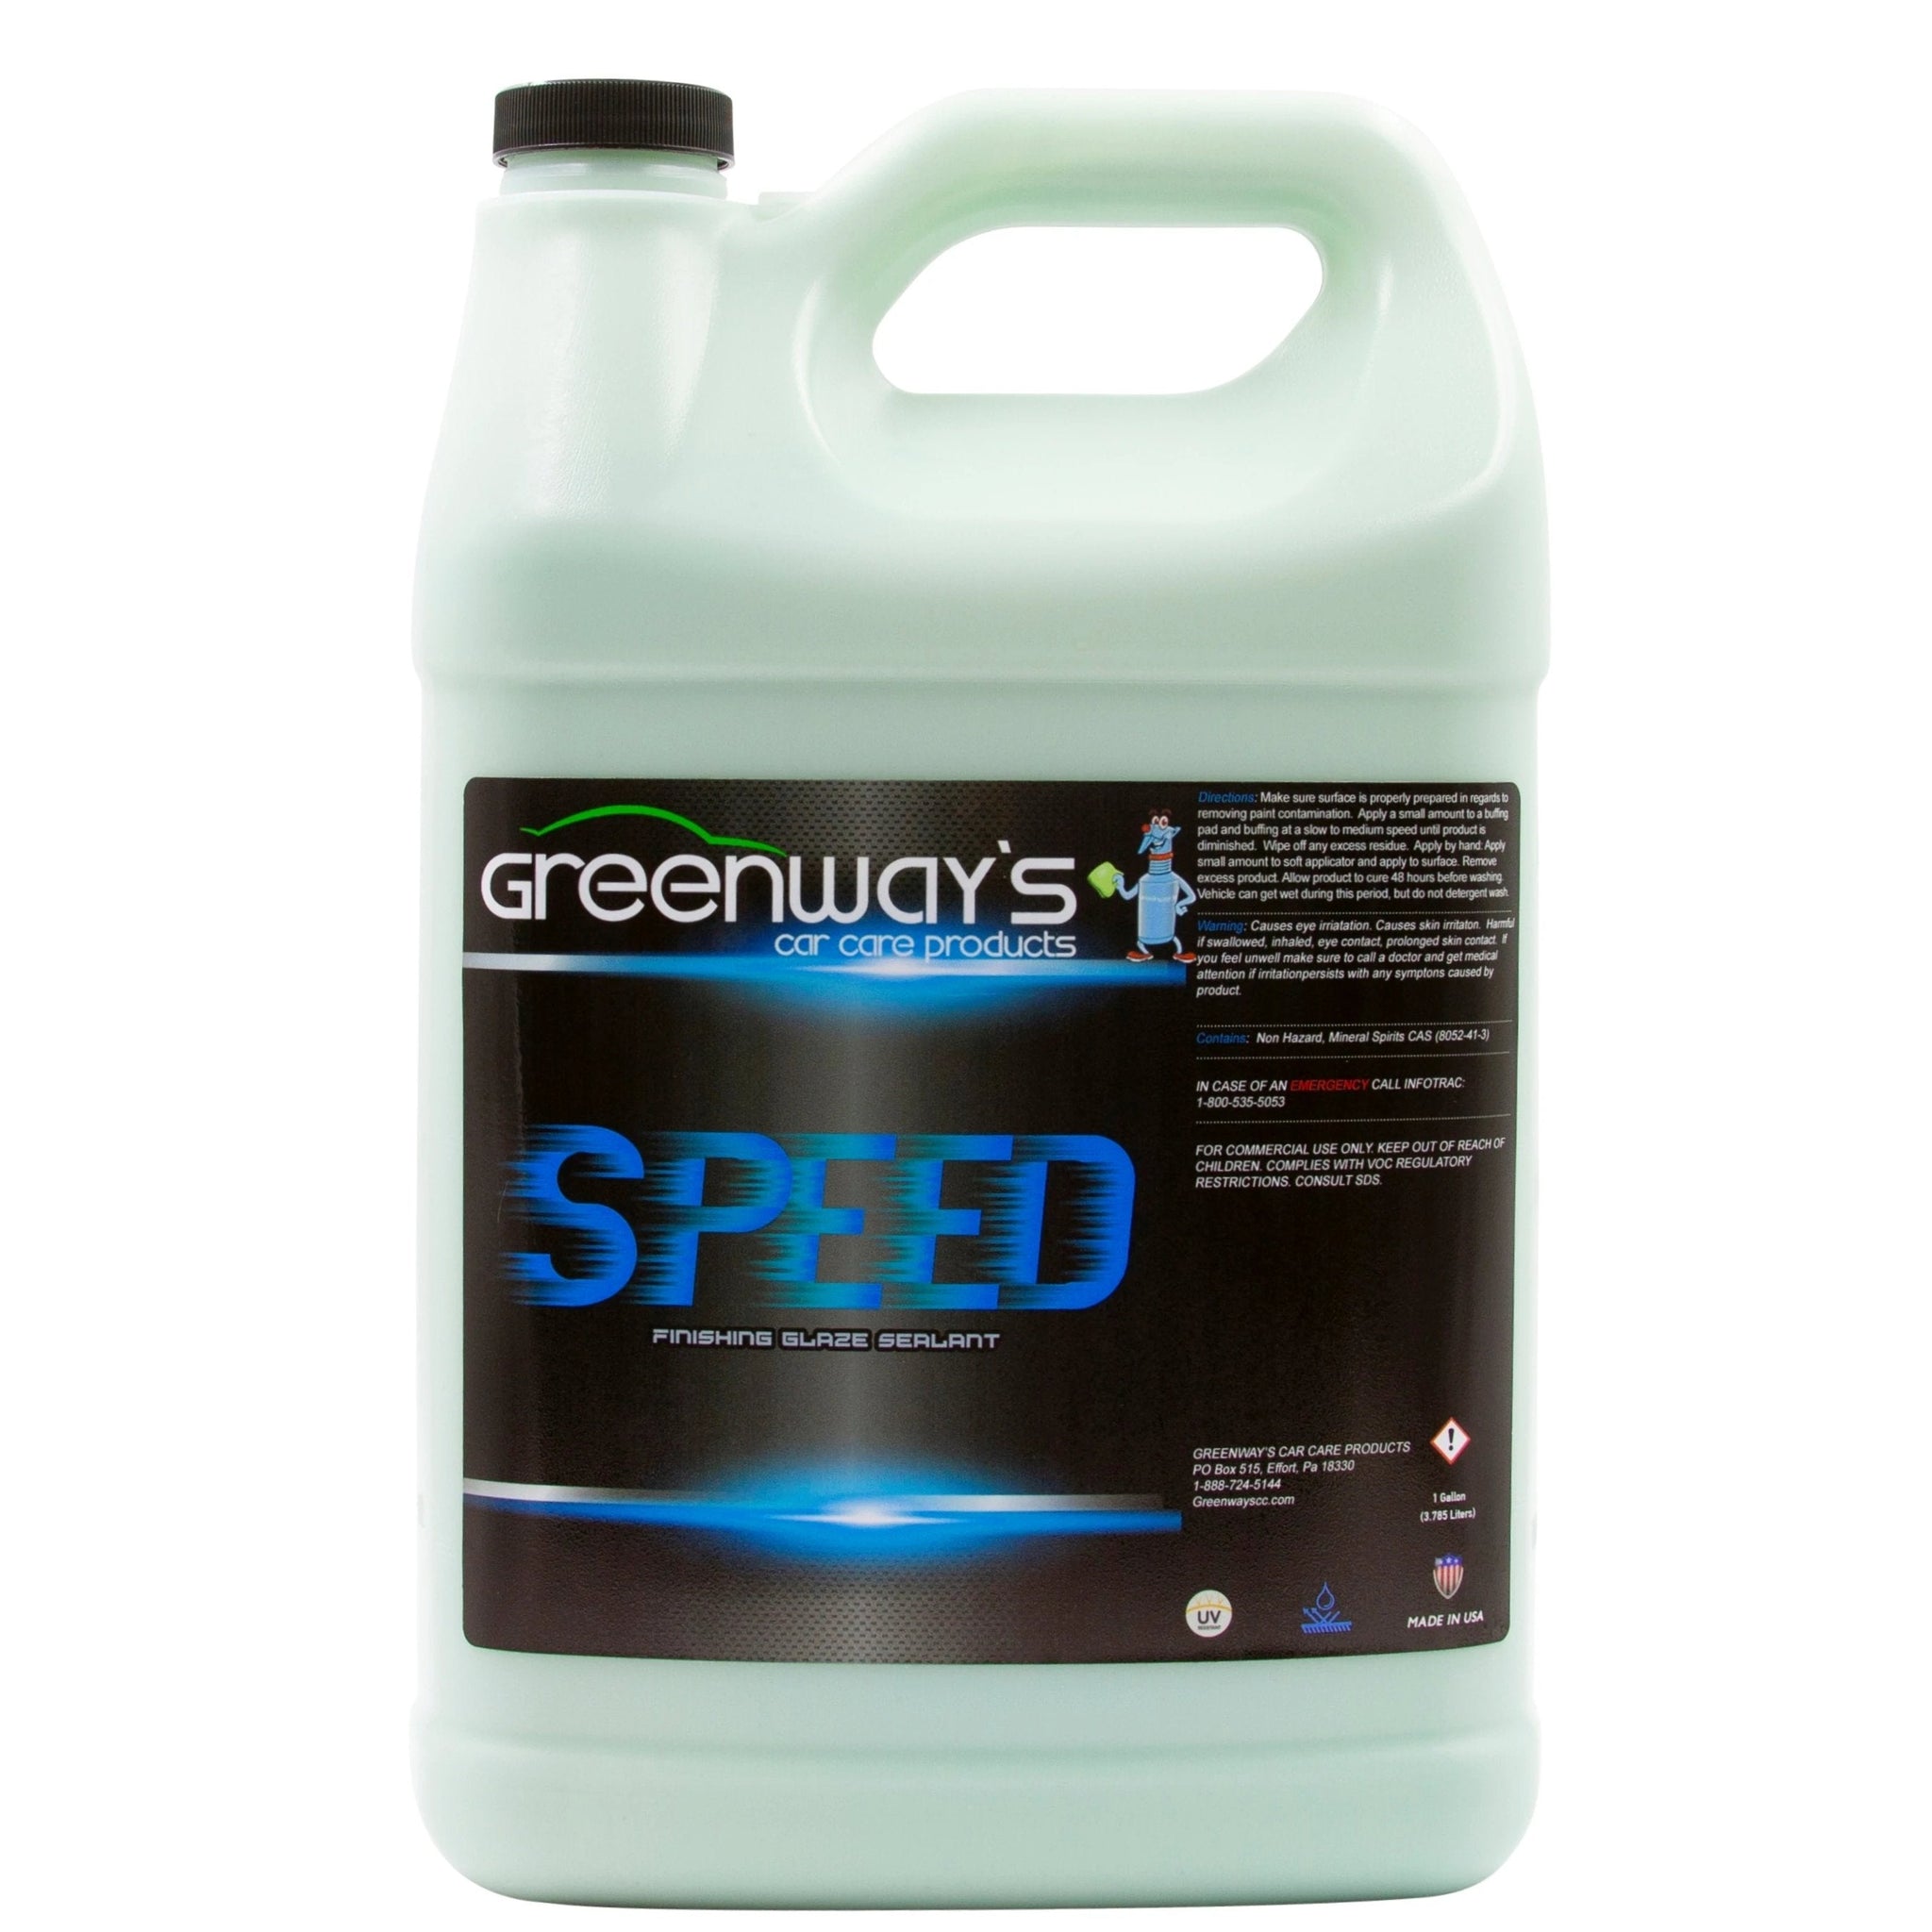 Greenway’s Speed, creamy wax-free, correction and protection finishing glaze sealant for sensitive paintwork, 1 gallon.